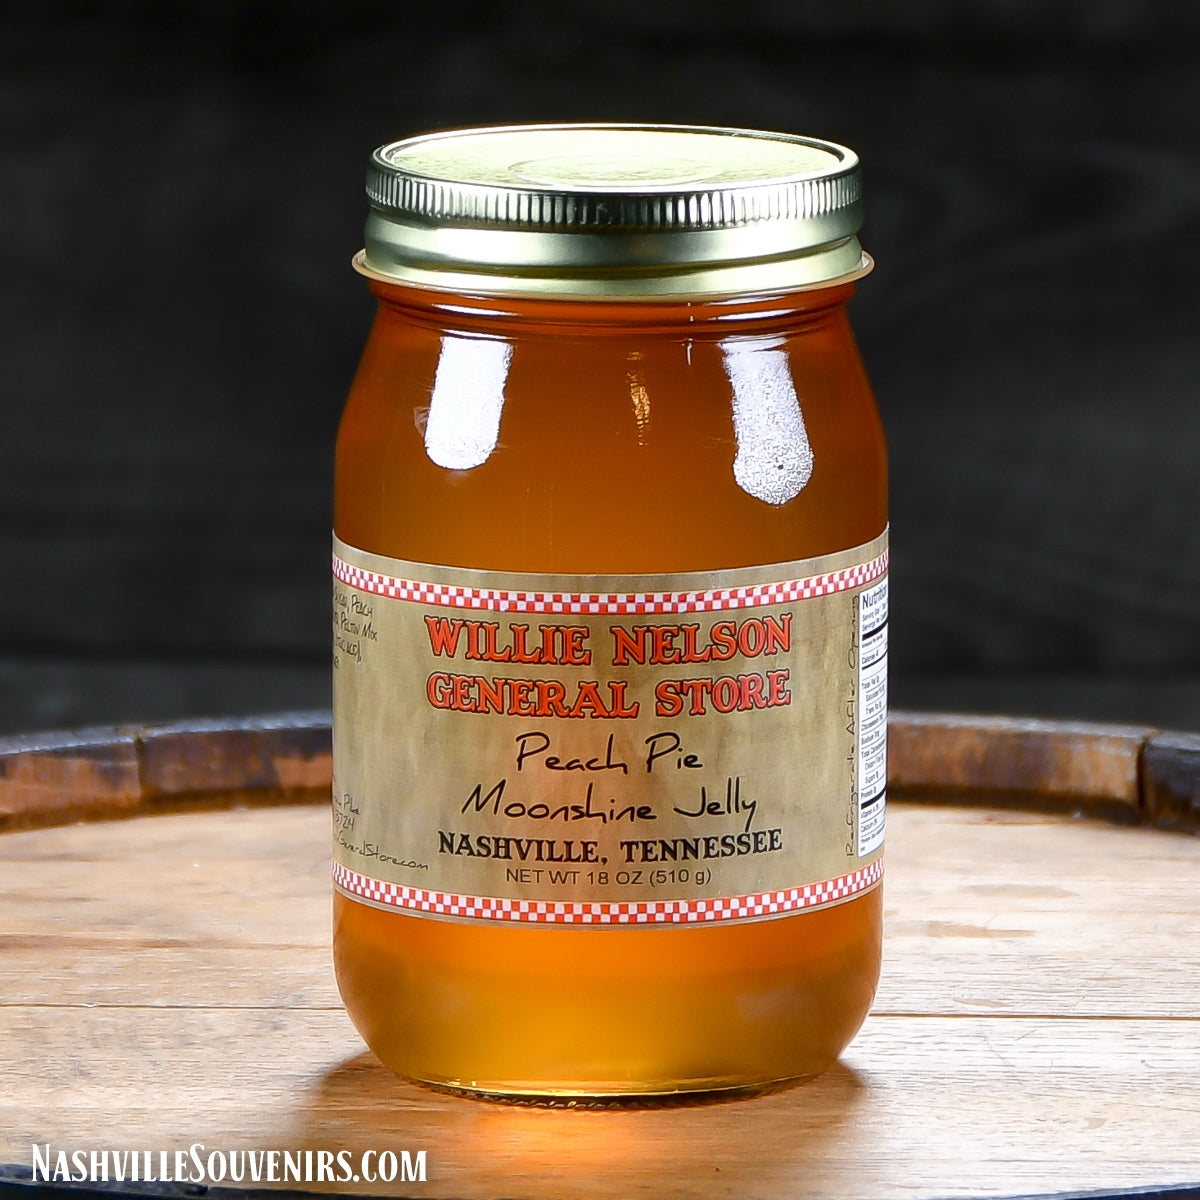 Willie Nelson General Store Peach Pie Moonshine Jelly